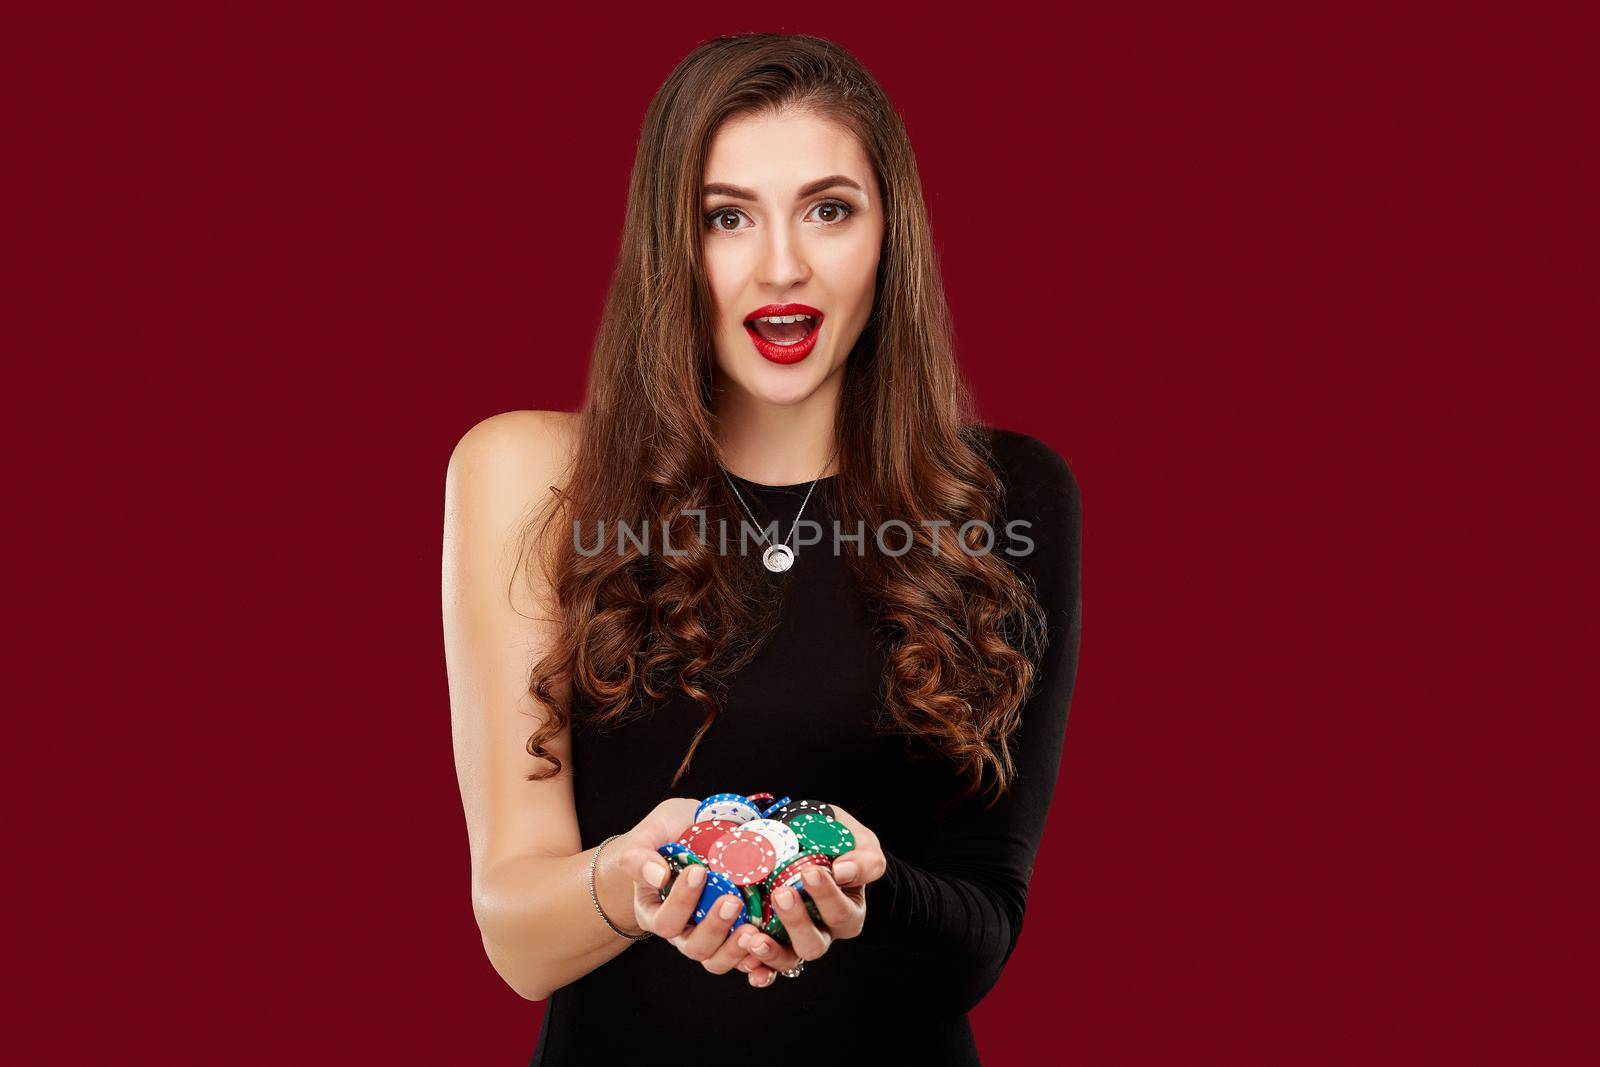 Casino, gambling, poker, people and entertainment concept - woman poker player in black dress with chips in hands on red background. Studio shot